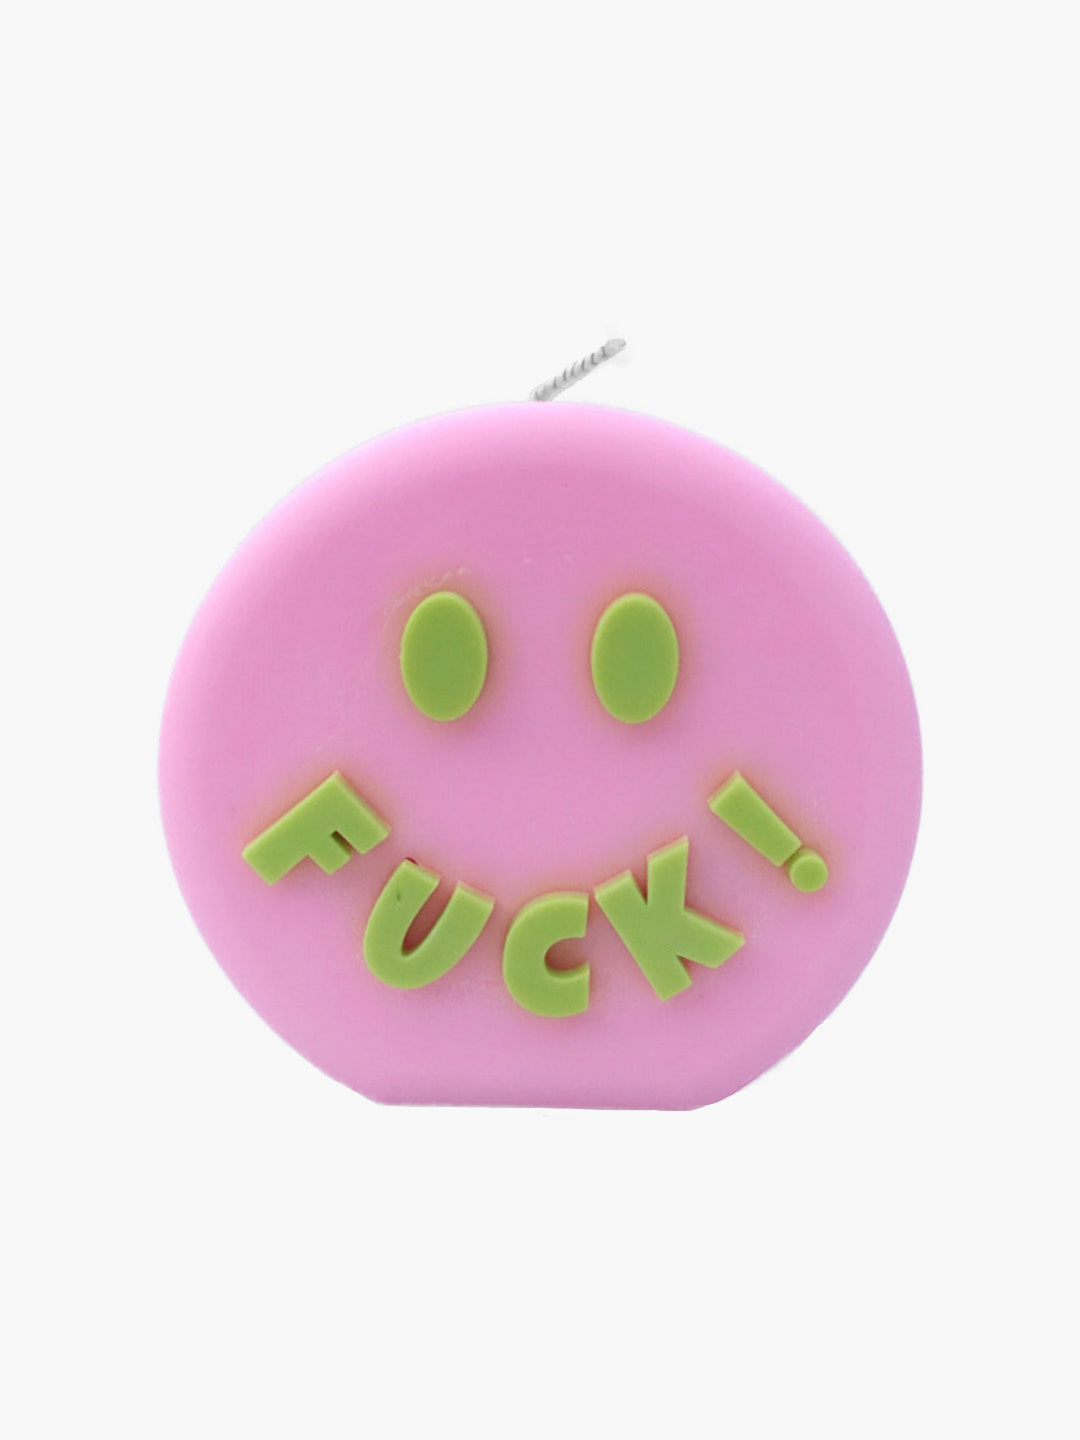 WAVEY CASAFuck face candle - Pink